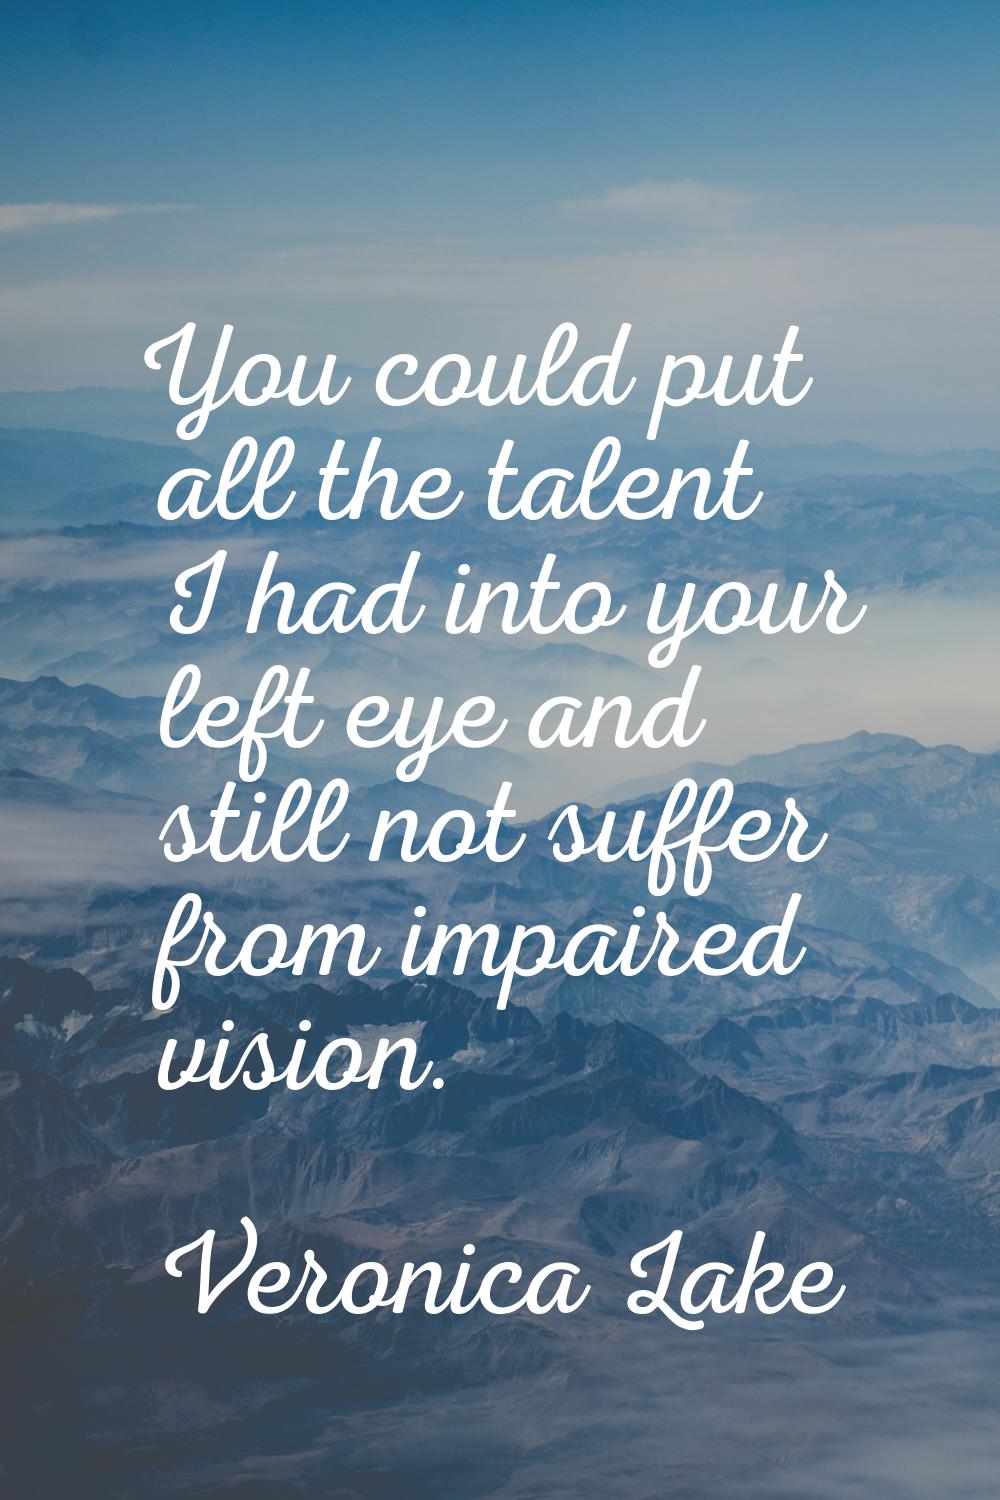 You could put all the talent I had into your left eye and still not suffer from impaired vision.